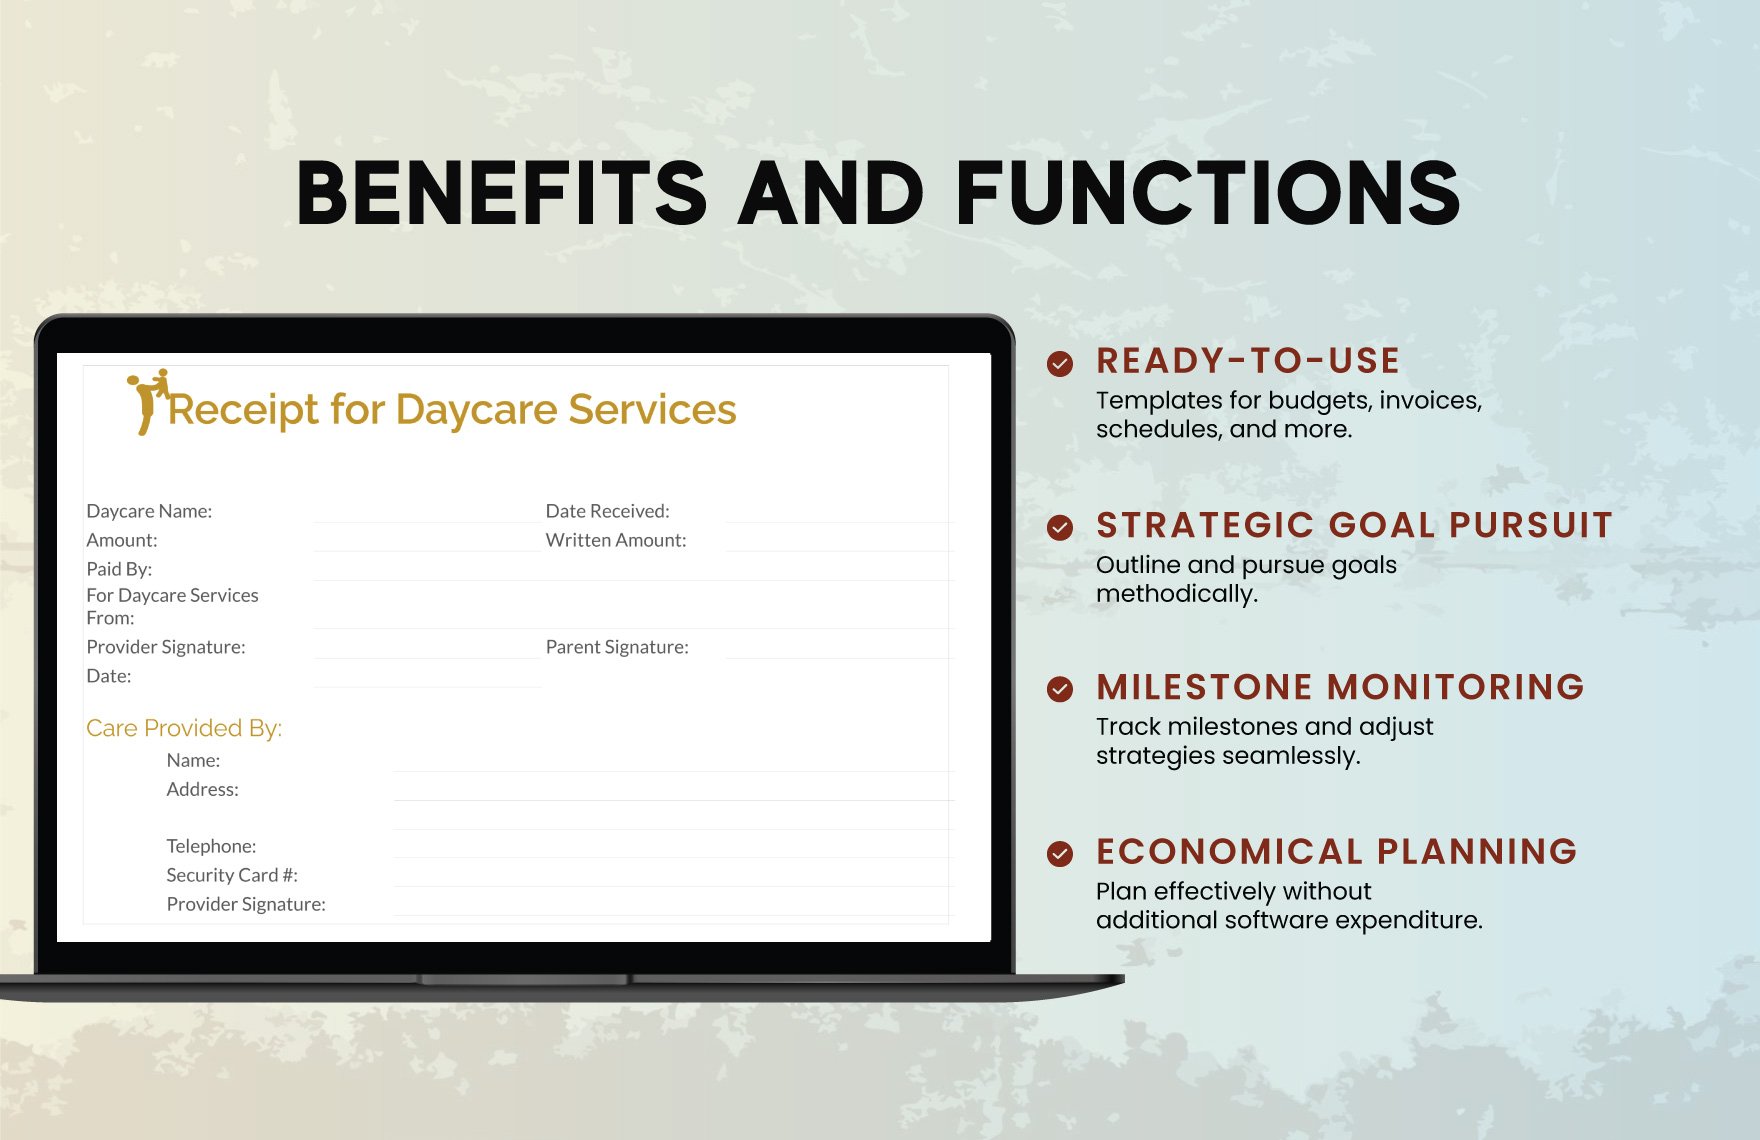 Receipt For Daycare Services Template